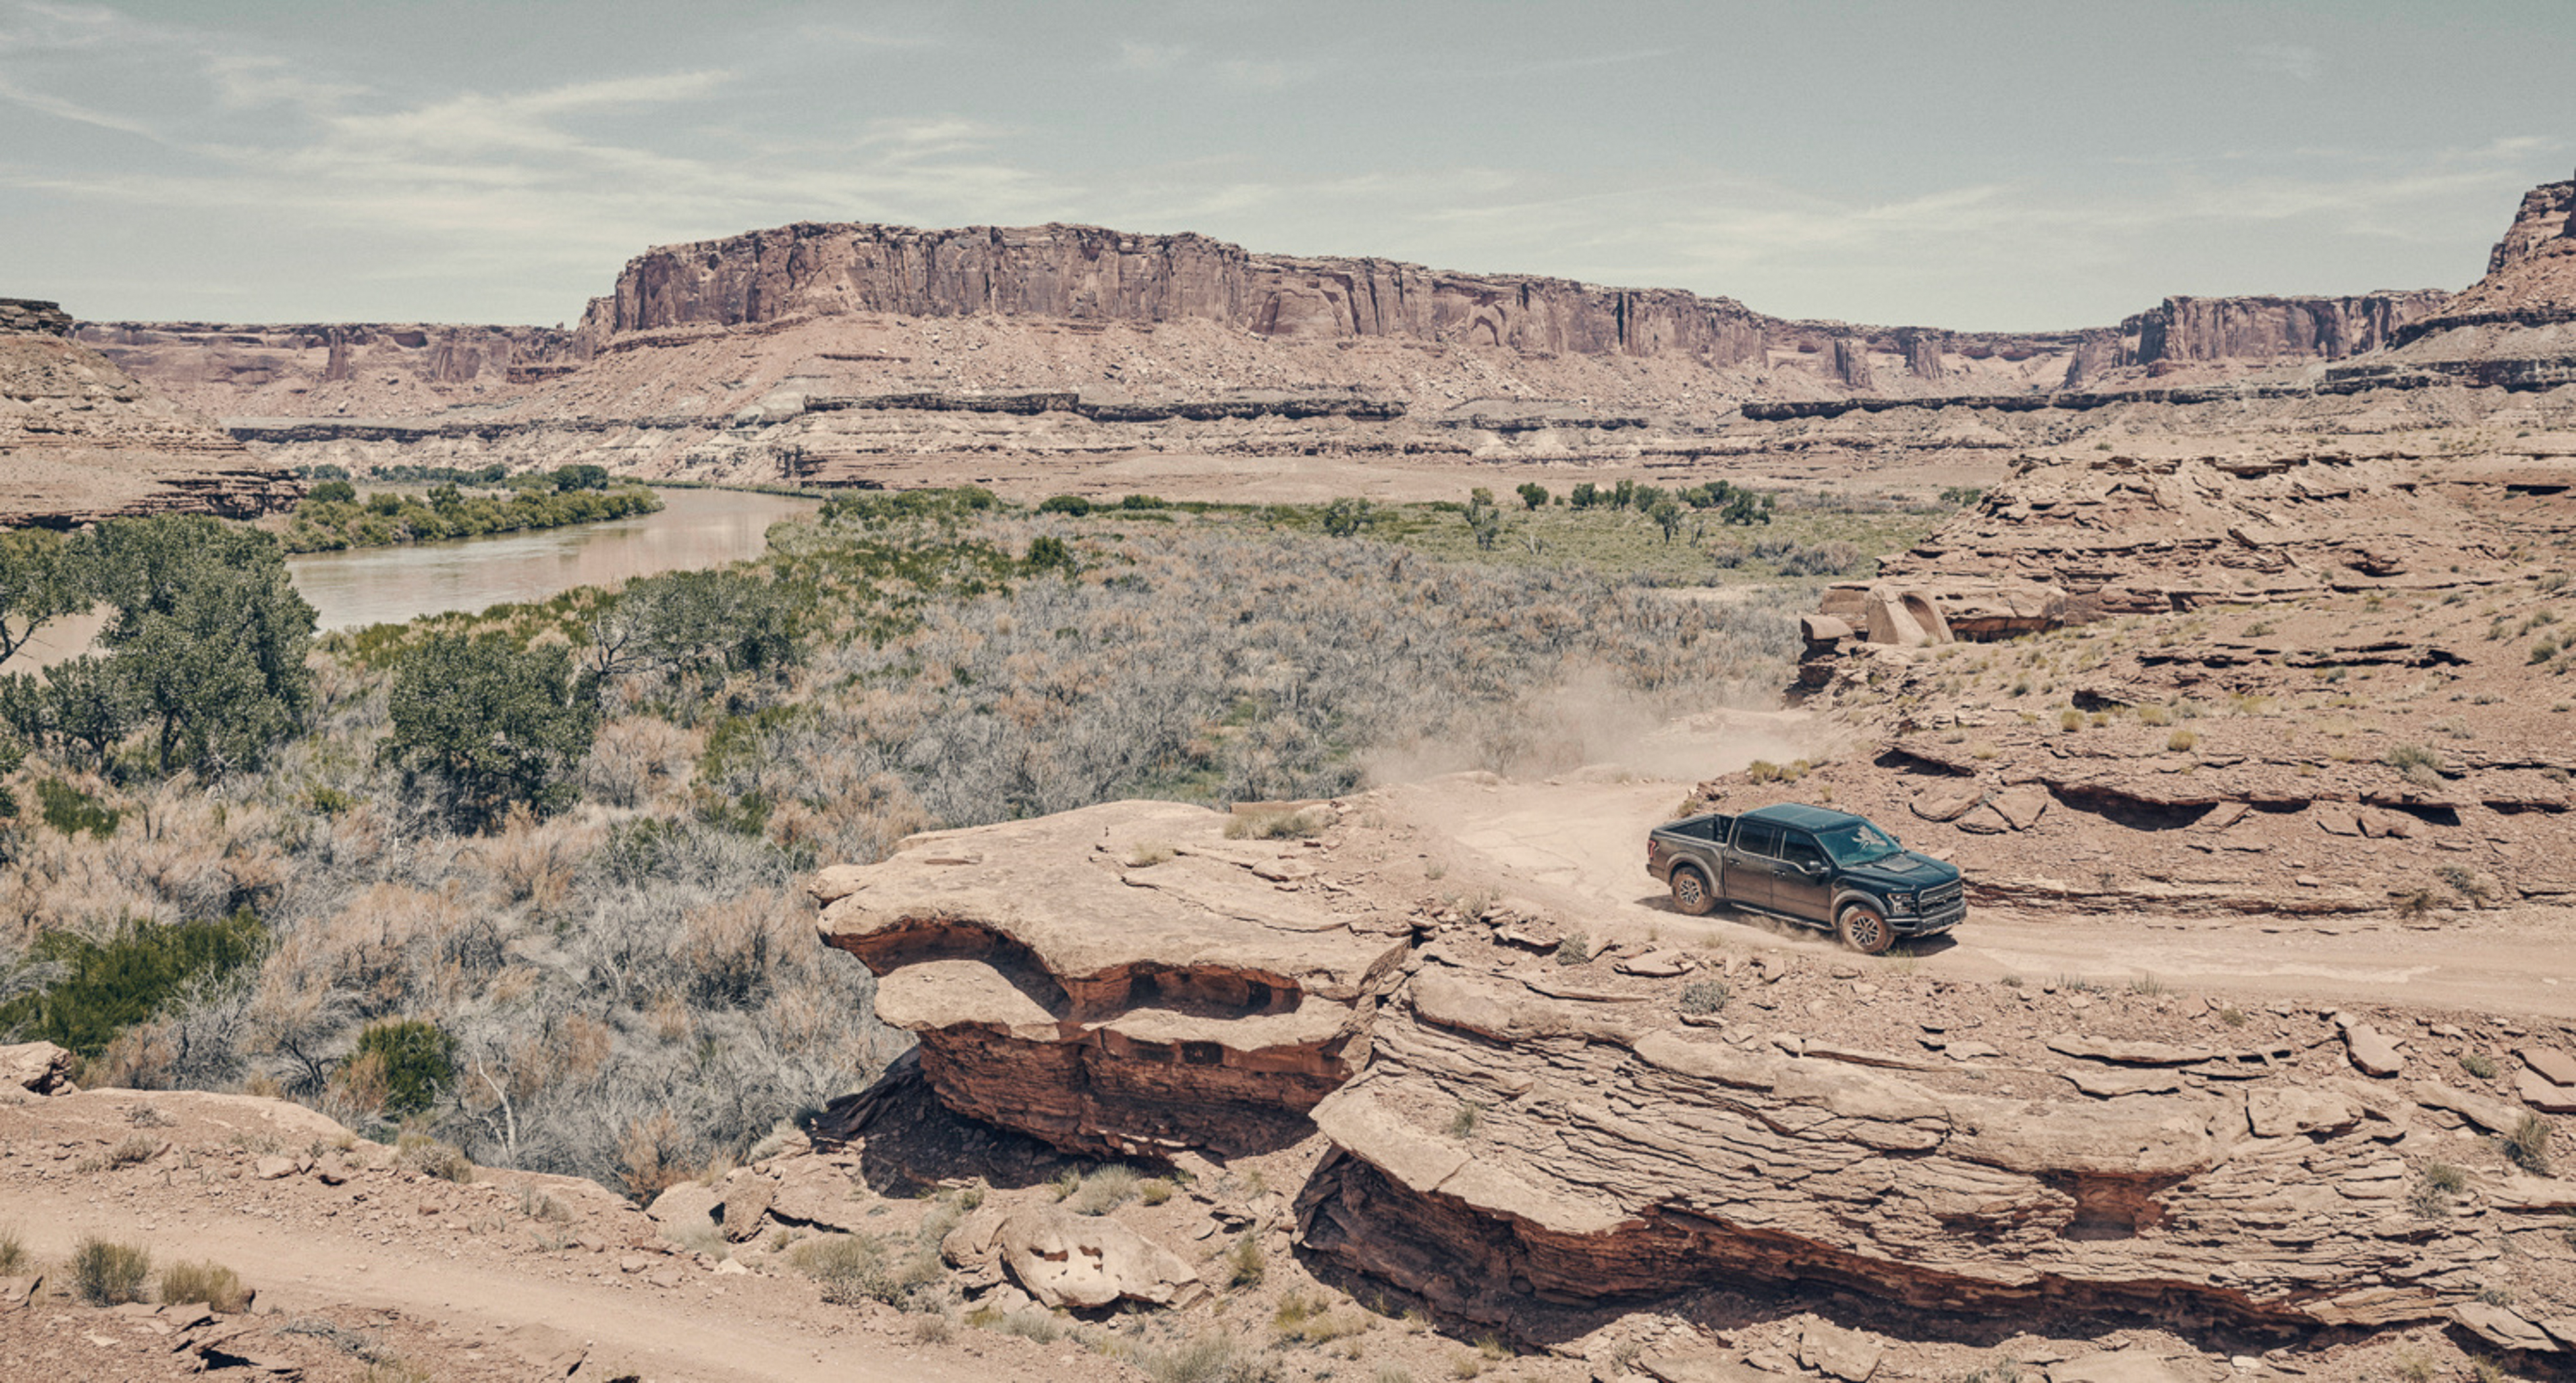  Paul Barshon | 4x4 Commercial Photography for Jeep, Groupe Renault, and Ford Raptor | Los Angeles commercial auto photographer shooting in remote and rugged locations for off-road vehicles, cars, and trucks. | Images from Moab Utah, Alabama Hills and Spain.